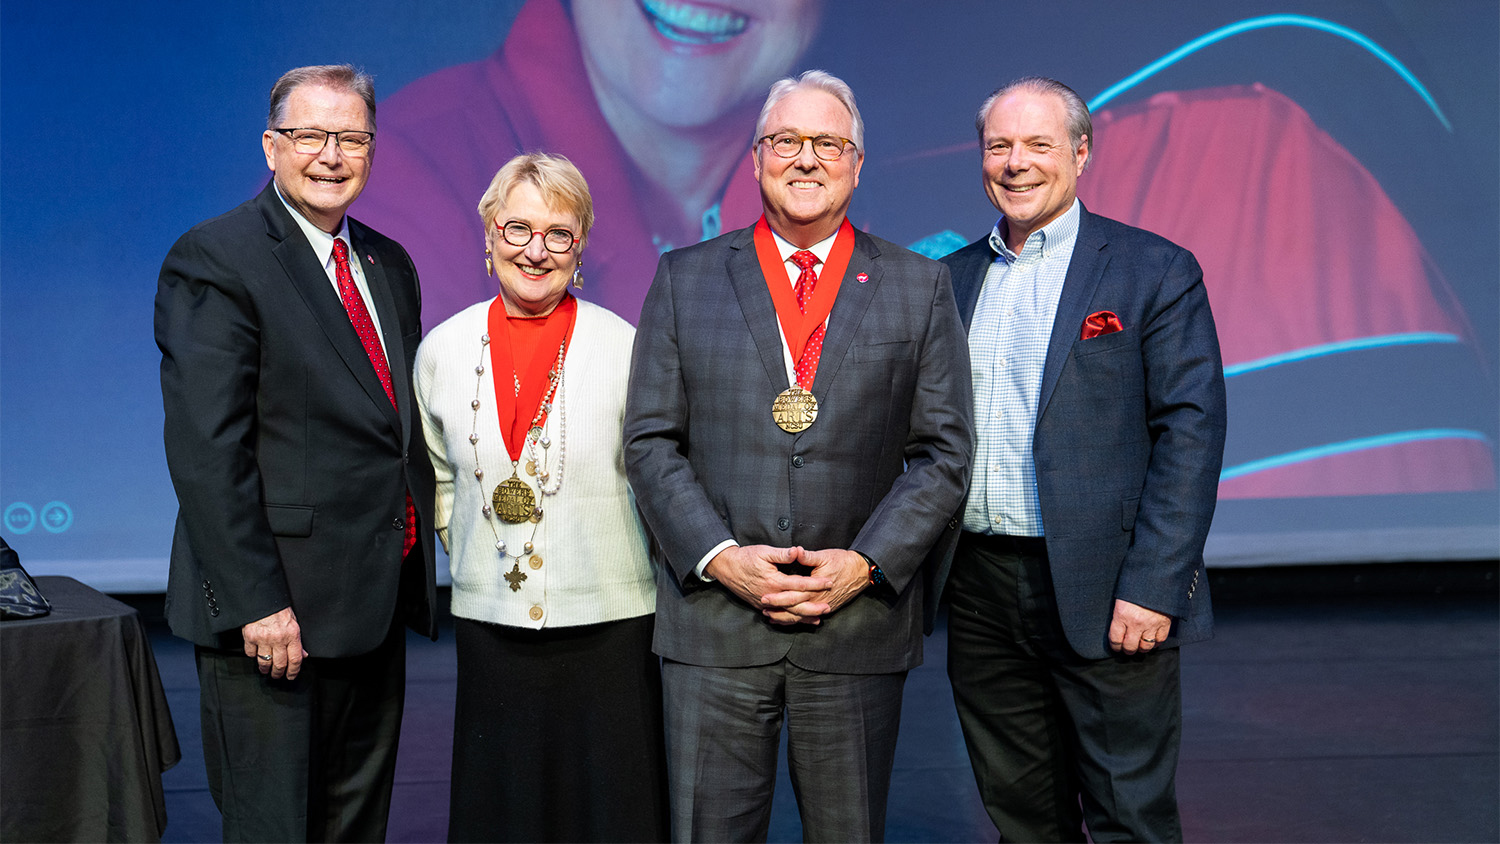 (From left) Dan Cook, chair of the Friends of Arts NC State Board; Susan Woodson; Randy Woodson, Chancellor of NC State; and Rich Holly, associate dean of University College and executive director for the arts.